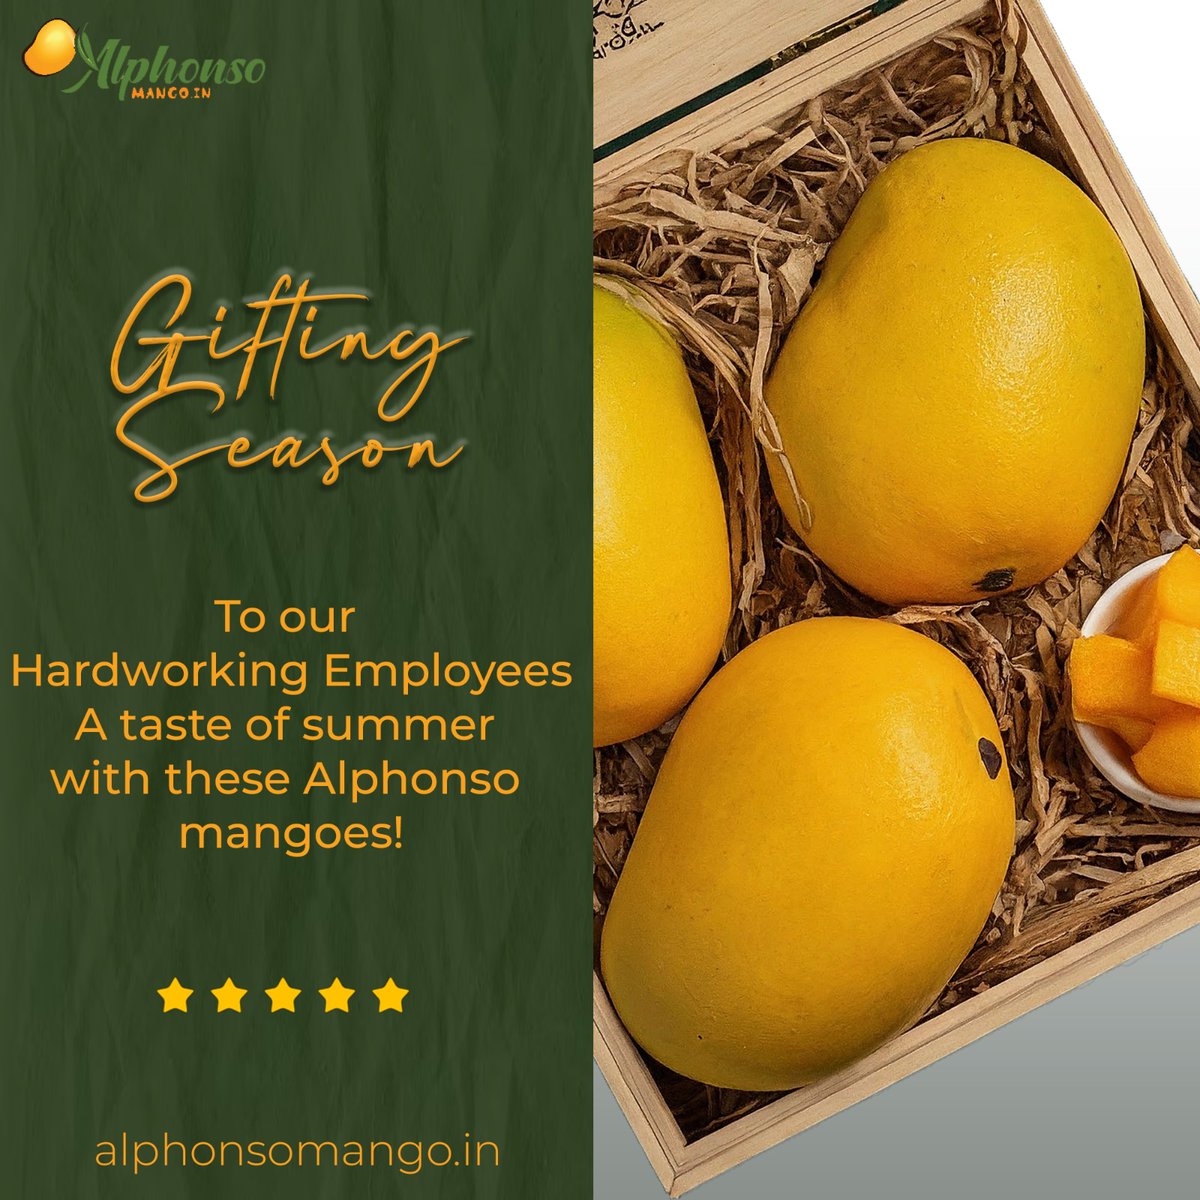 Savor the taste of success and sweetness with the king of fruits, Alphonso mangoes! Show your team how much you appreciate them with this luxurious treat. The Gift of Gold: Alphonso Mangoes is the perfect way to say thank you to your valued employees.

Visit